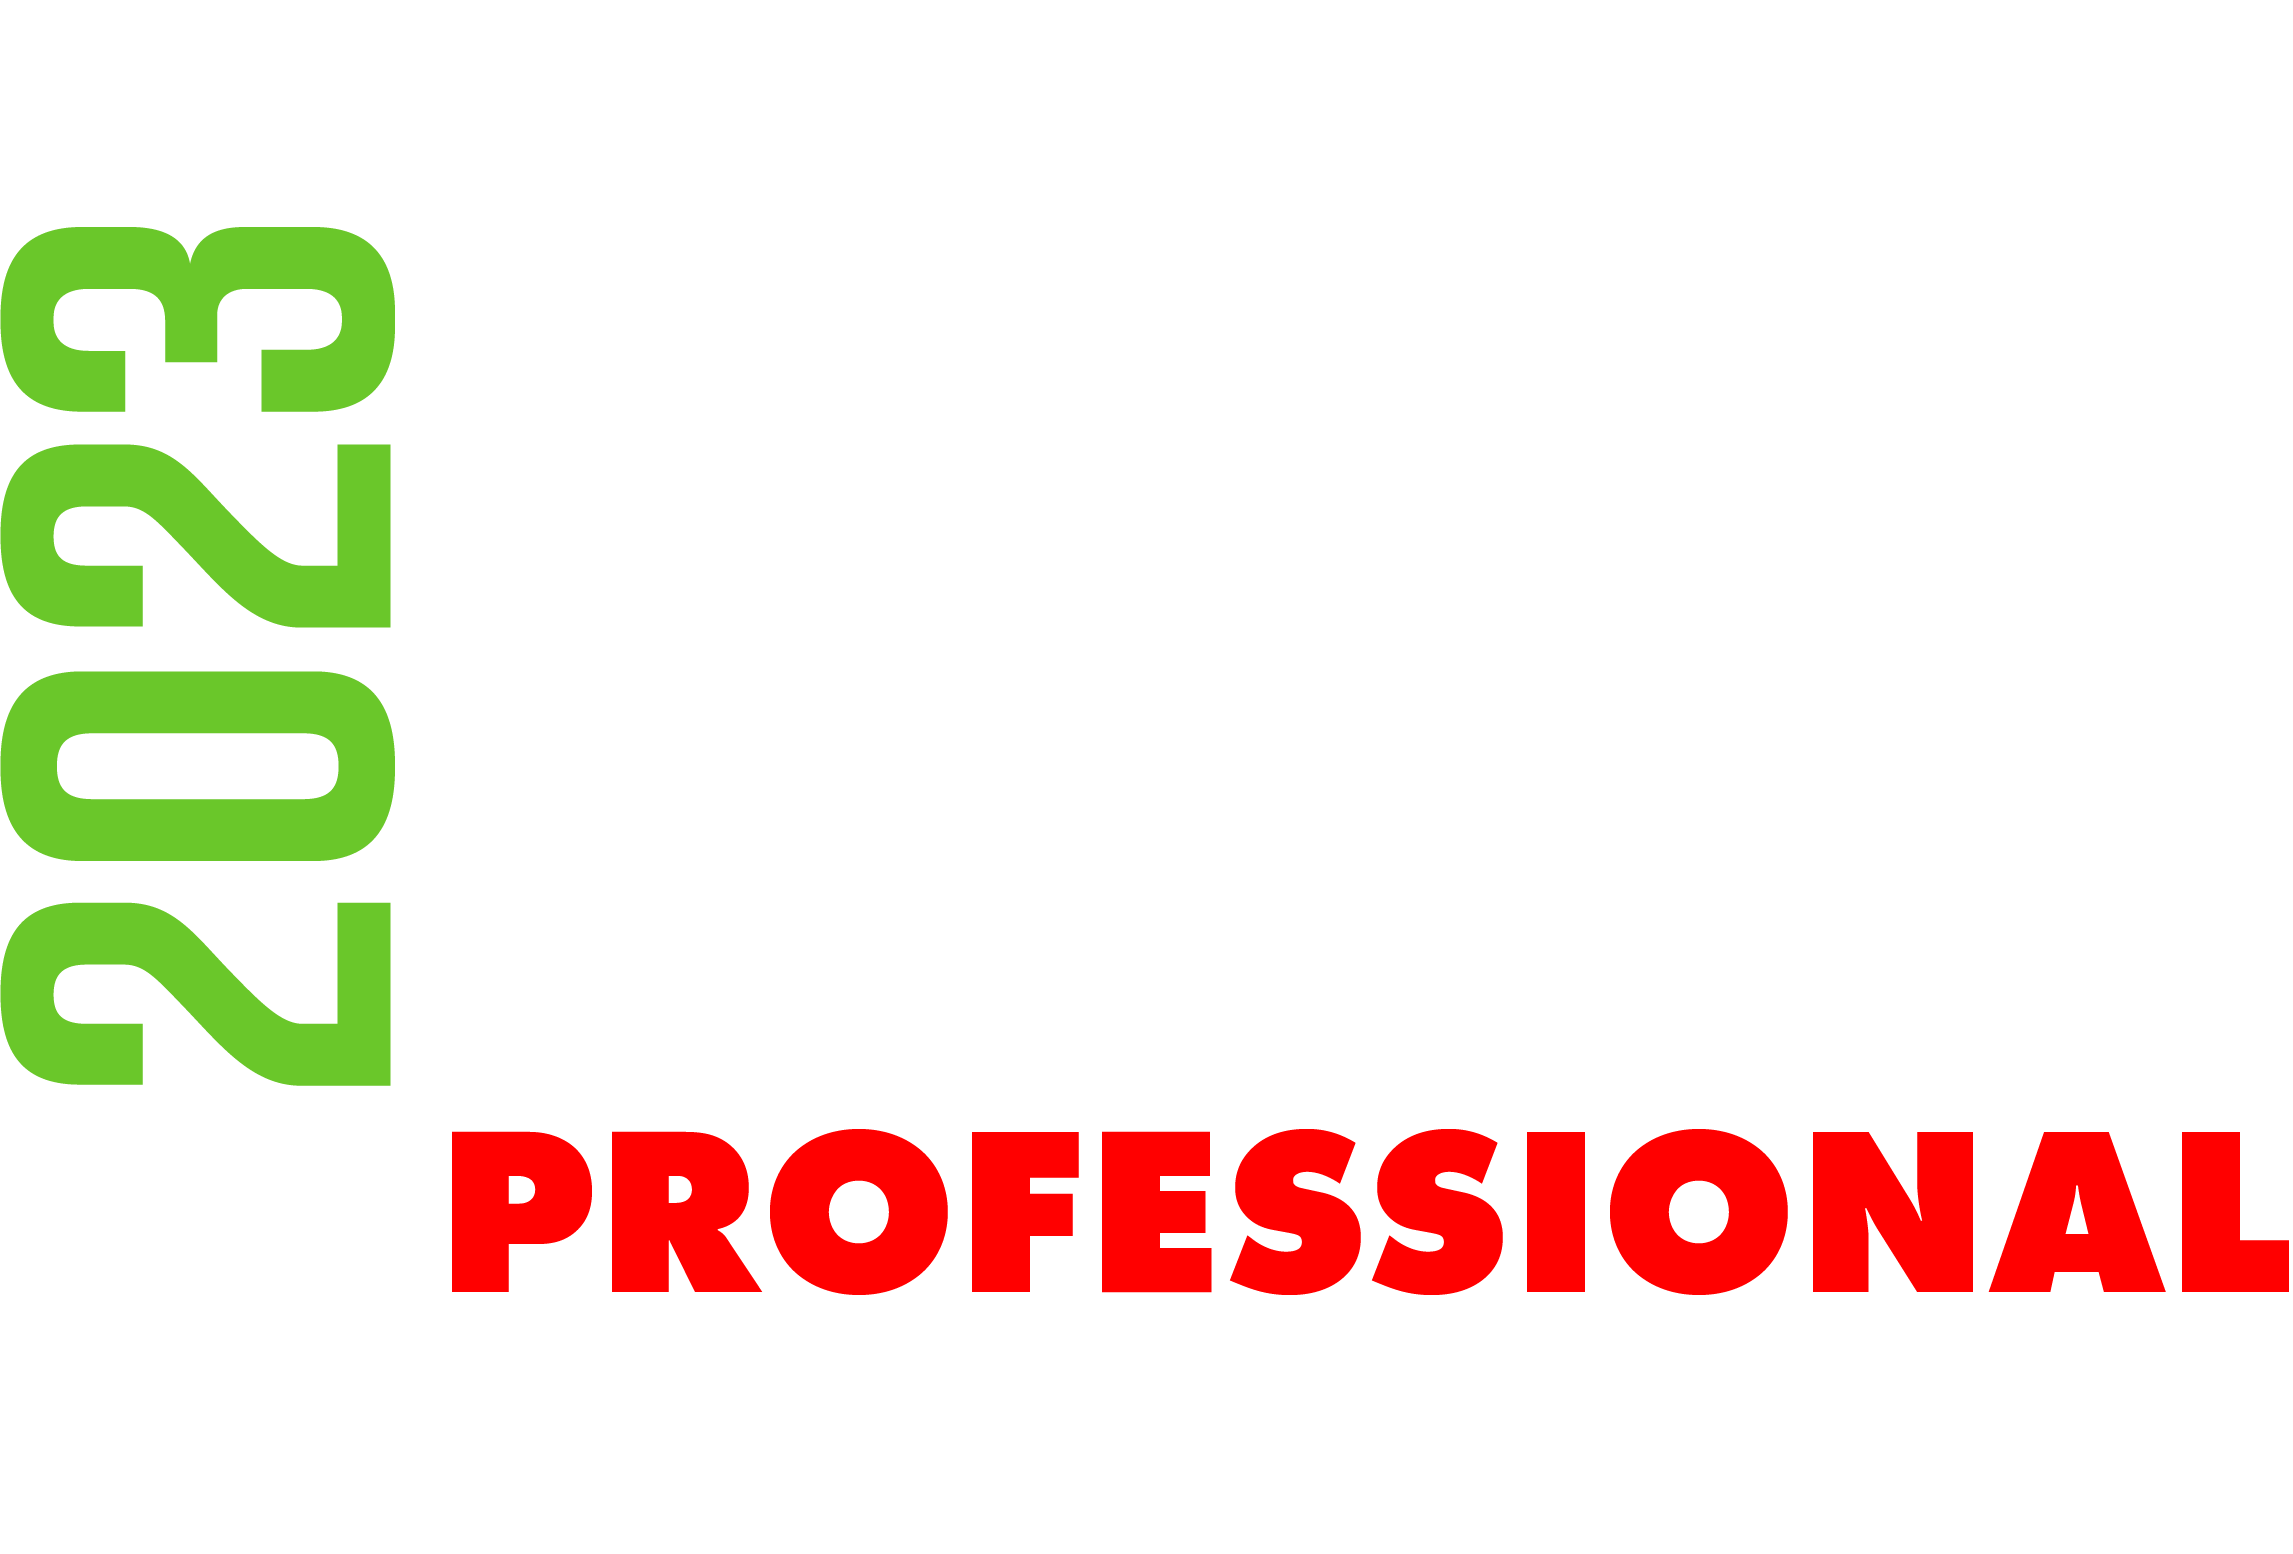 Enter the Freestyle Professional Build Category 2023